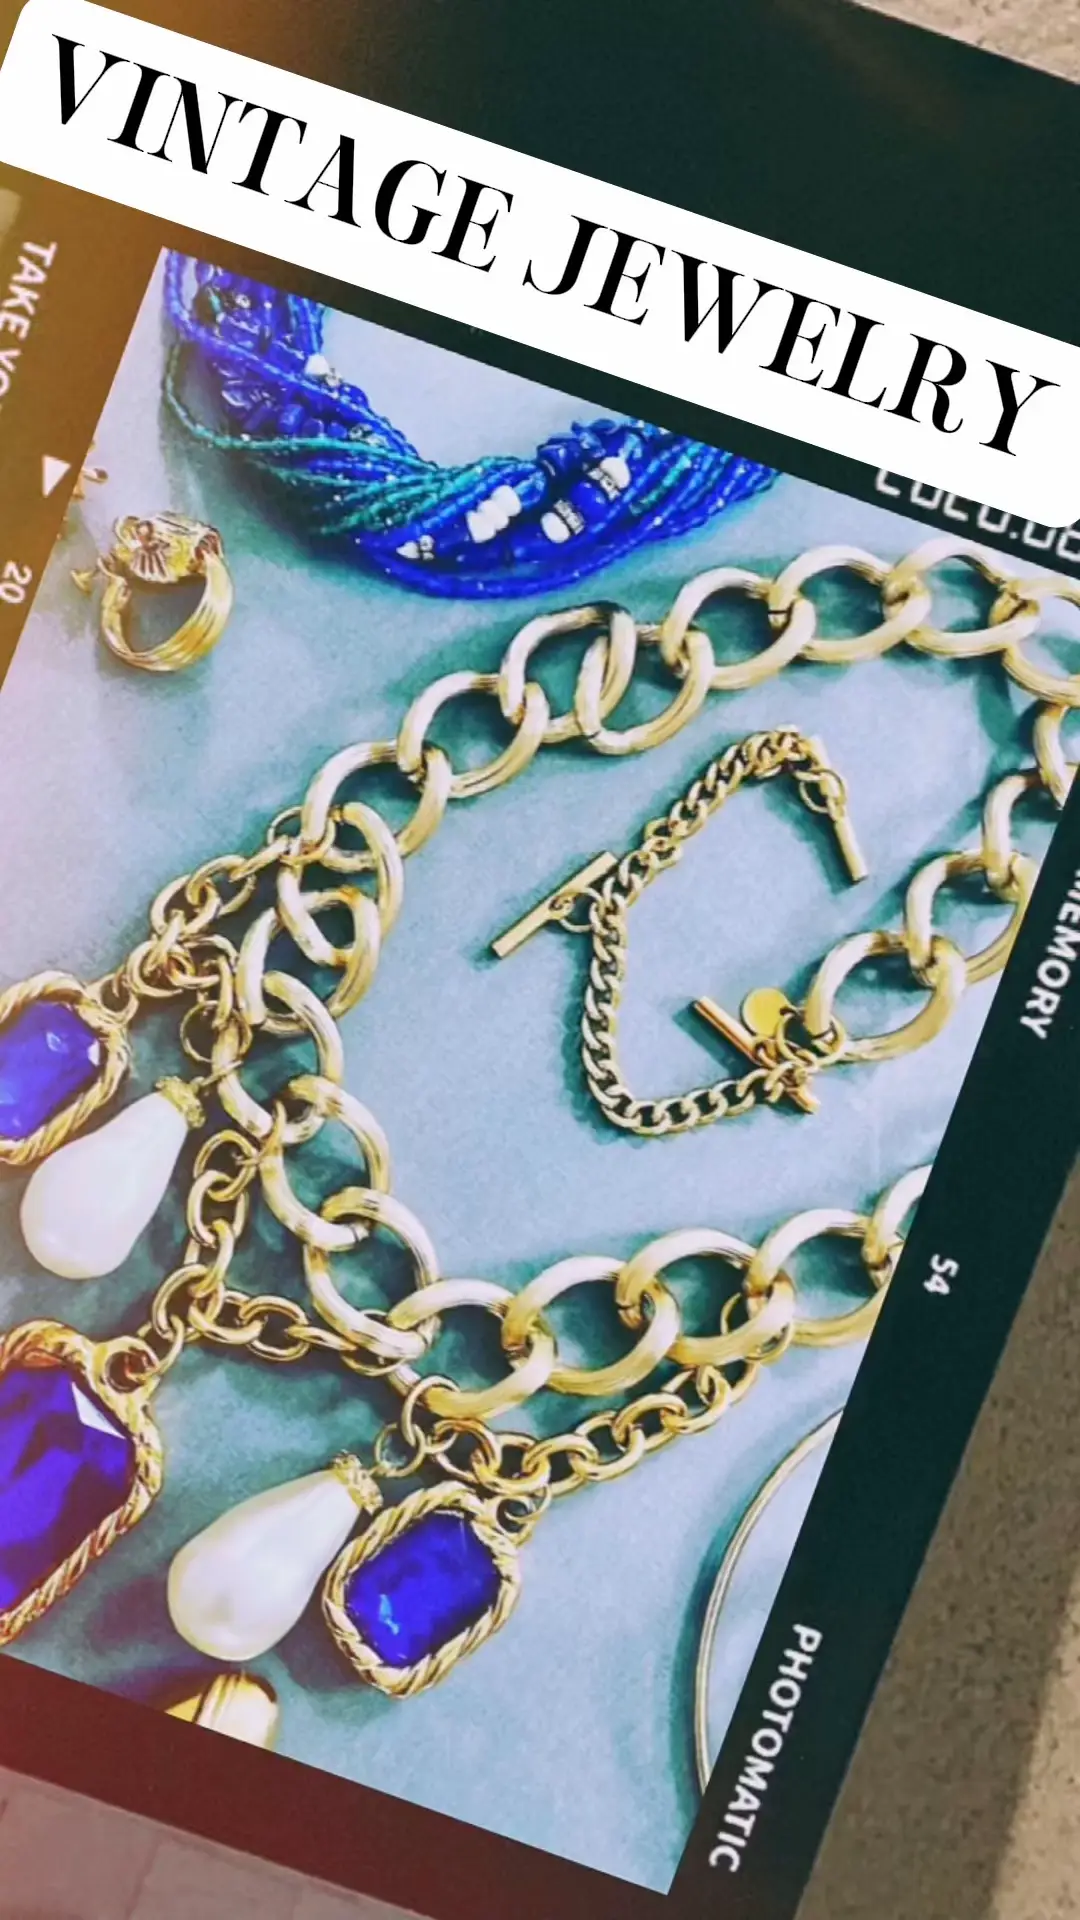 LV Bracelet Reworked to Affordable Luxury Jewelry, Video published by  etherealgift